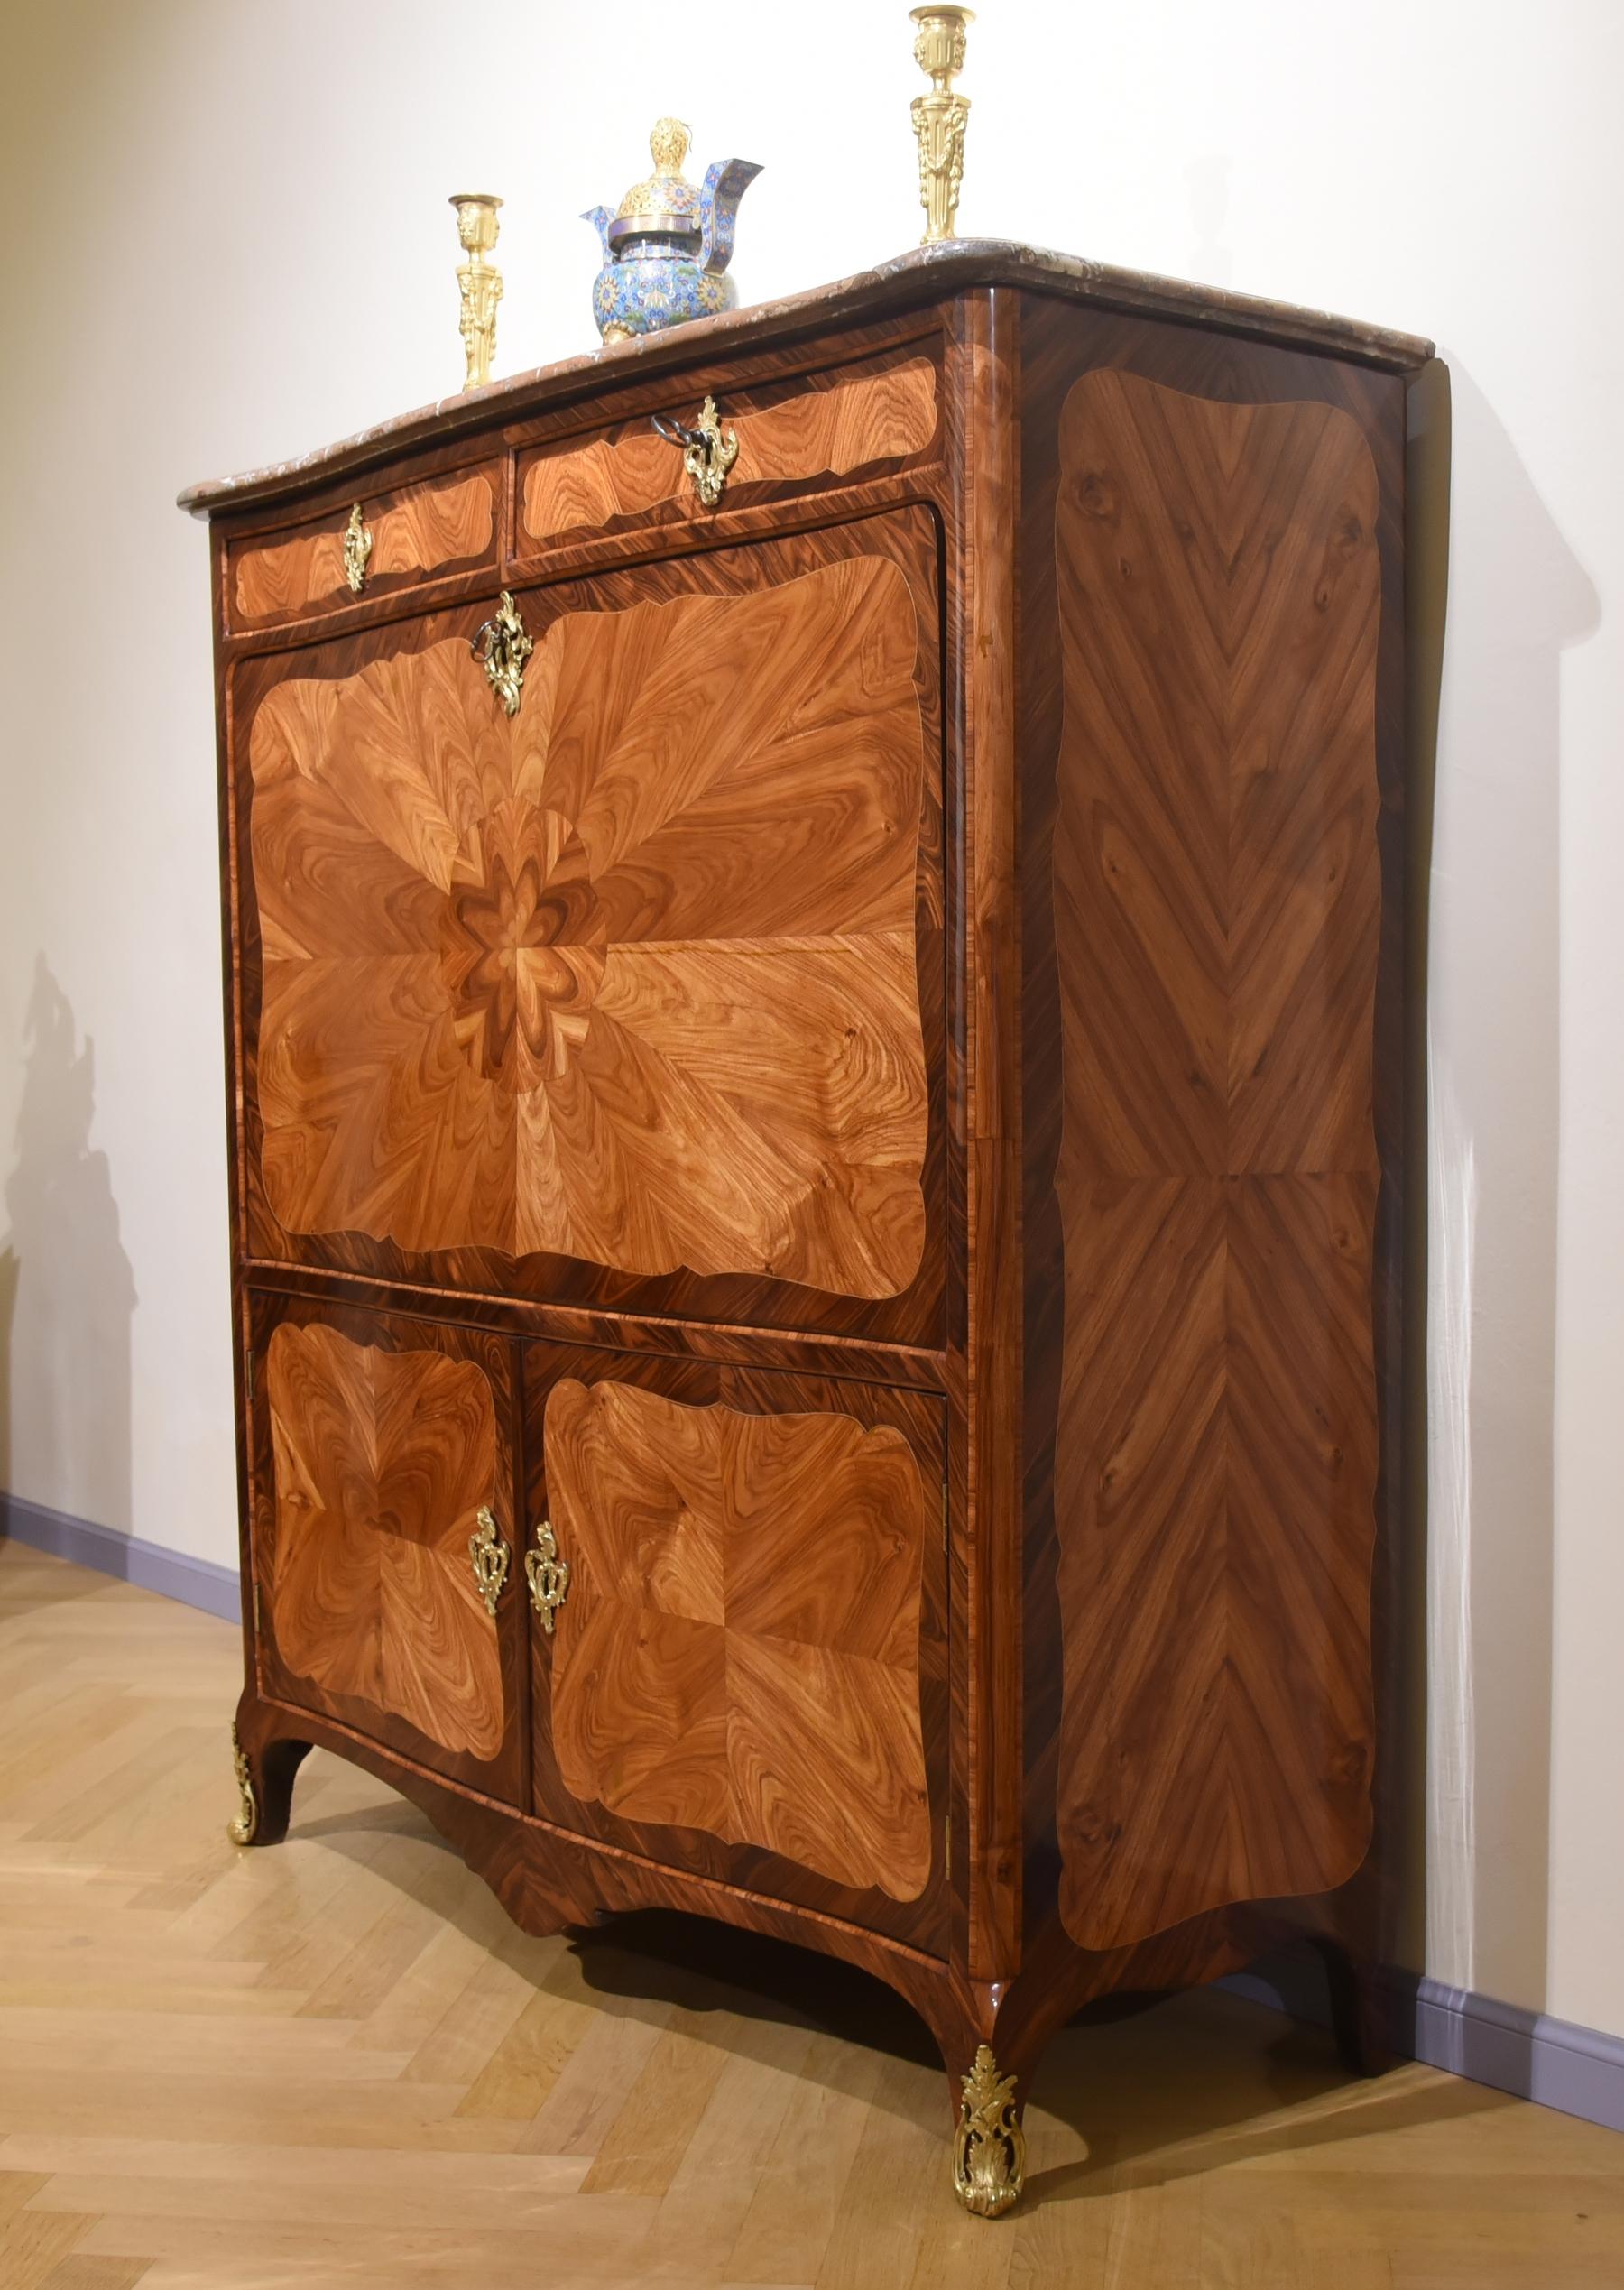 Refined Secretaire, Louis XV style, Lastronato with different woods: walnut, rosewood and oak, the wood motifs are butterfly with open leaf stain. The top marble is red, 8 internal drawers plus two doors with shelves. The decorations are in gilded